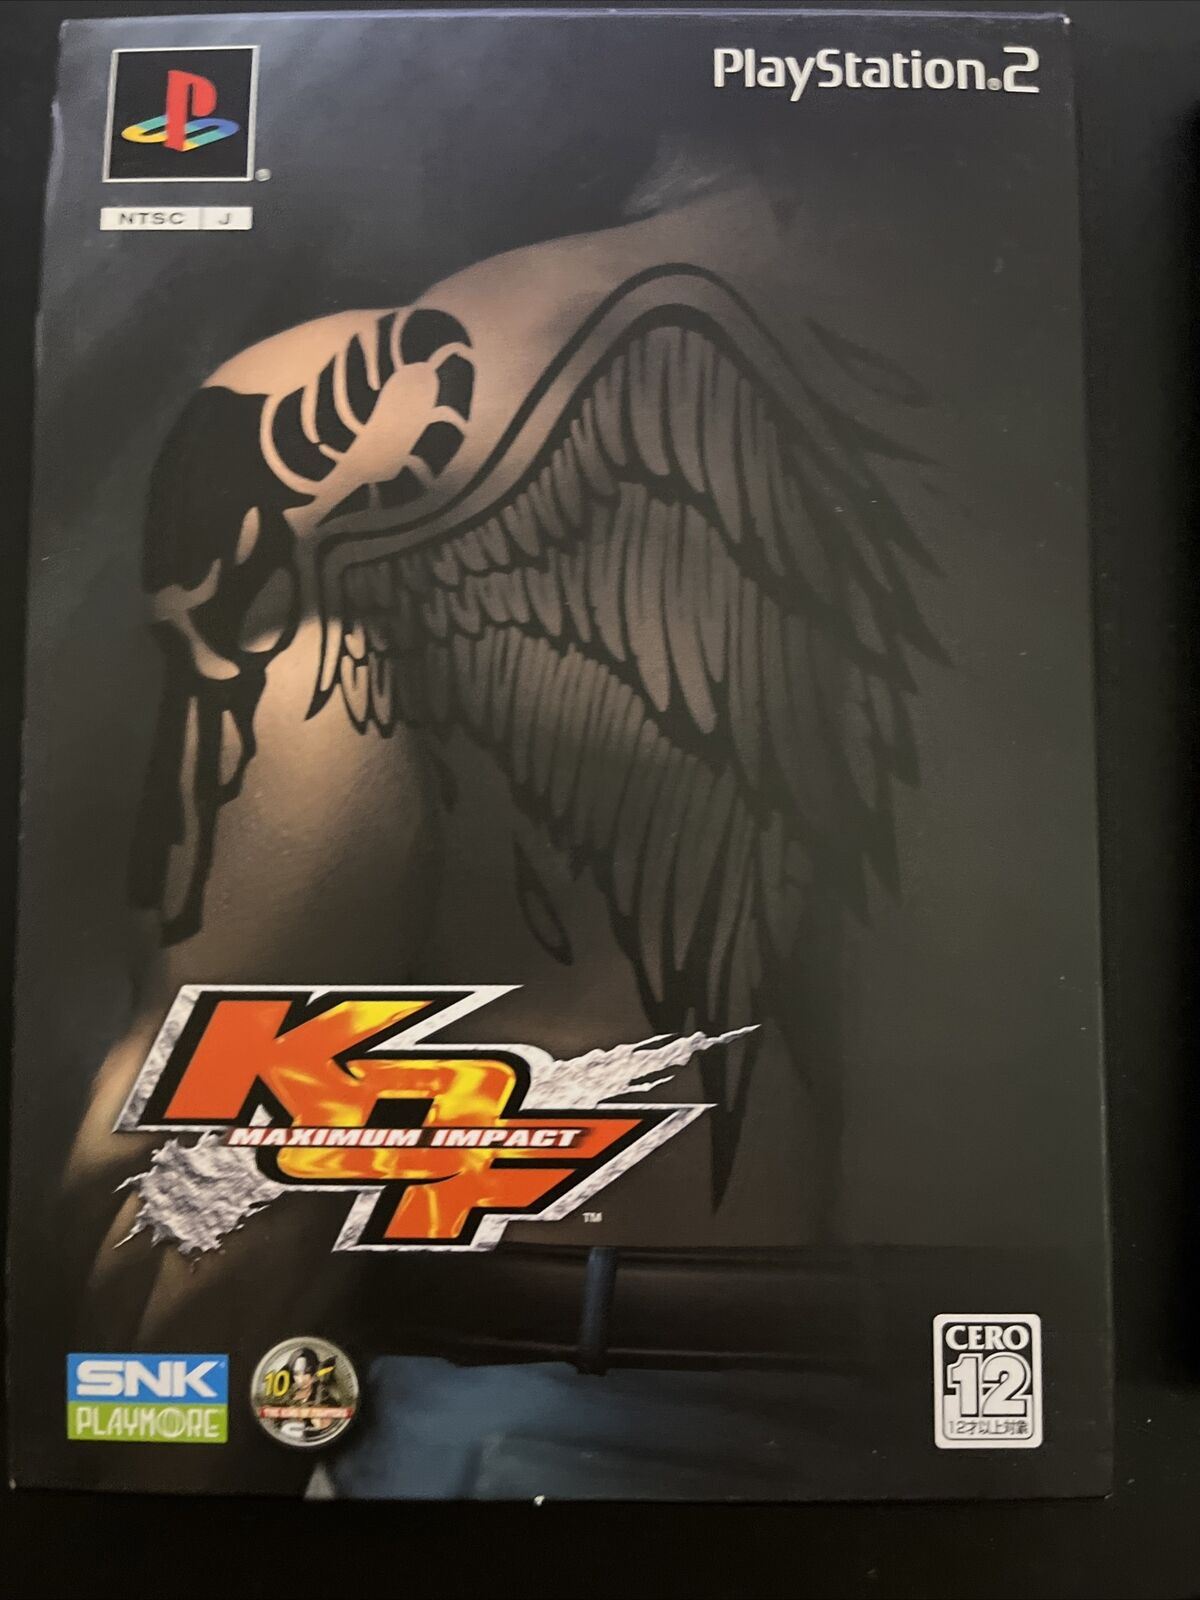 THE KING OF FIGHTERS '97 (NTSC-J) - BACK